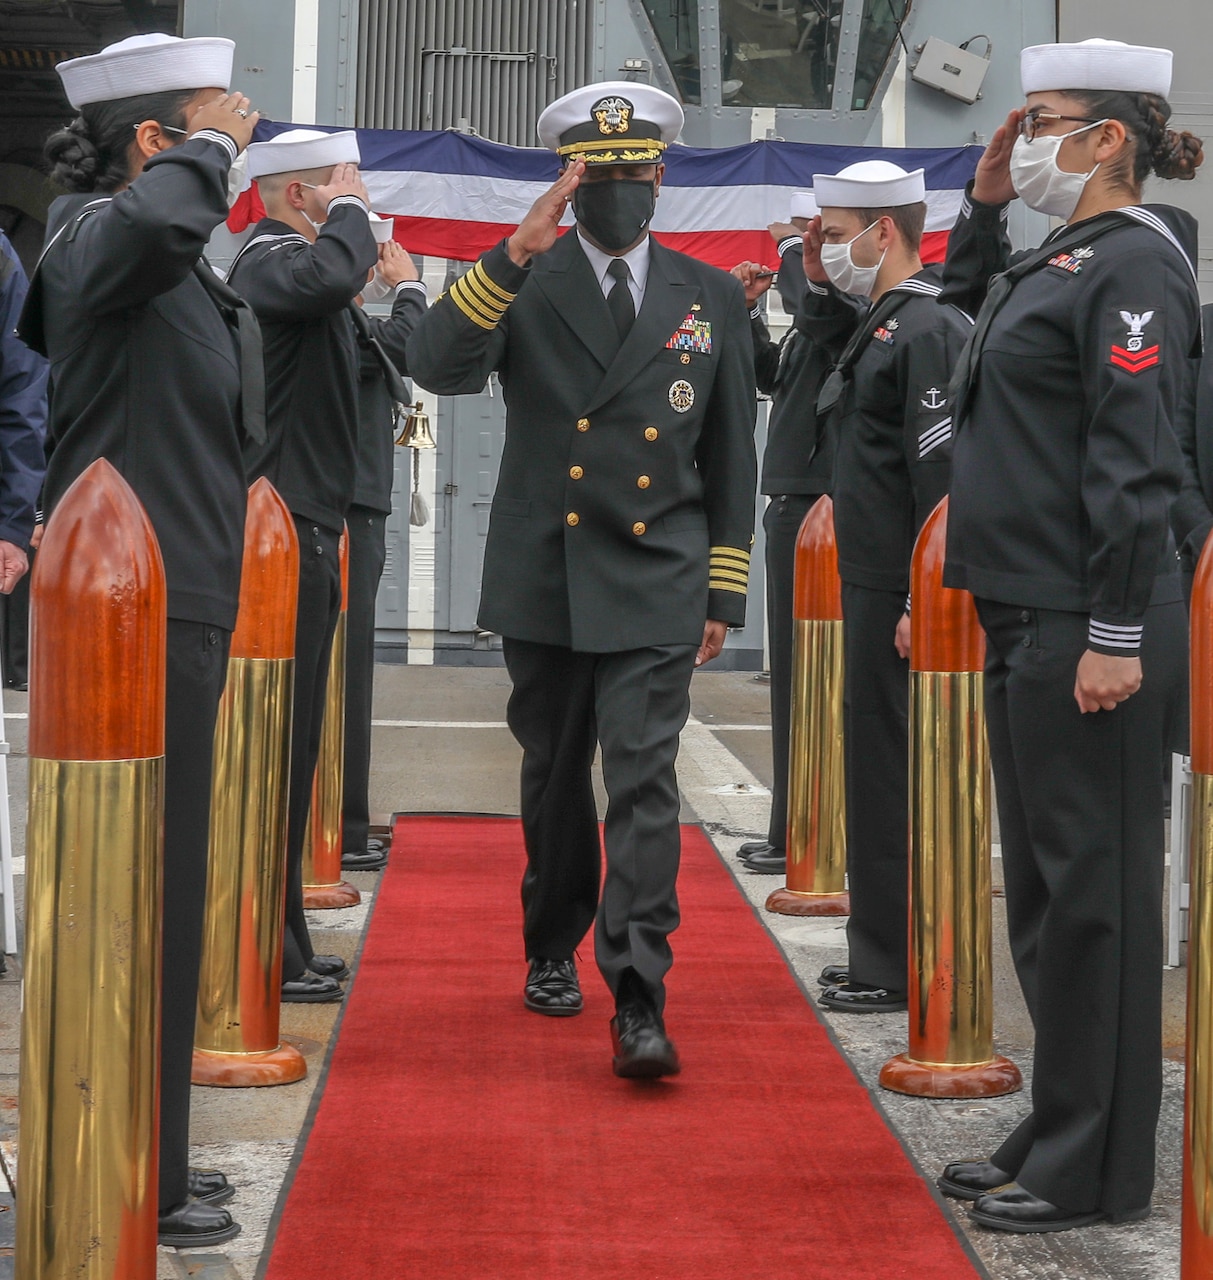 YOKOSUKA, Japan (March 19, 2021) Capt. Walter Mainor is greeted during a change of command ceremony aboard the Arleigh-Burke class guided-missile destroyer USS Mustin (DDG 89) while in port at Naval Base Yokosuka. (US Navy photo by Mass Communication Specialist 3rd Class Arthur Rosen)